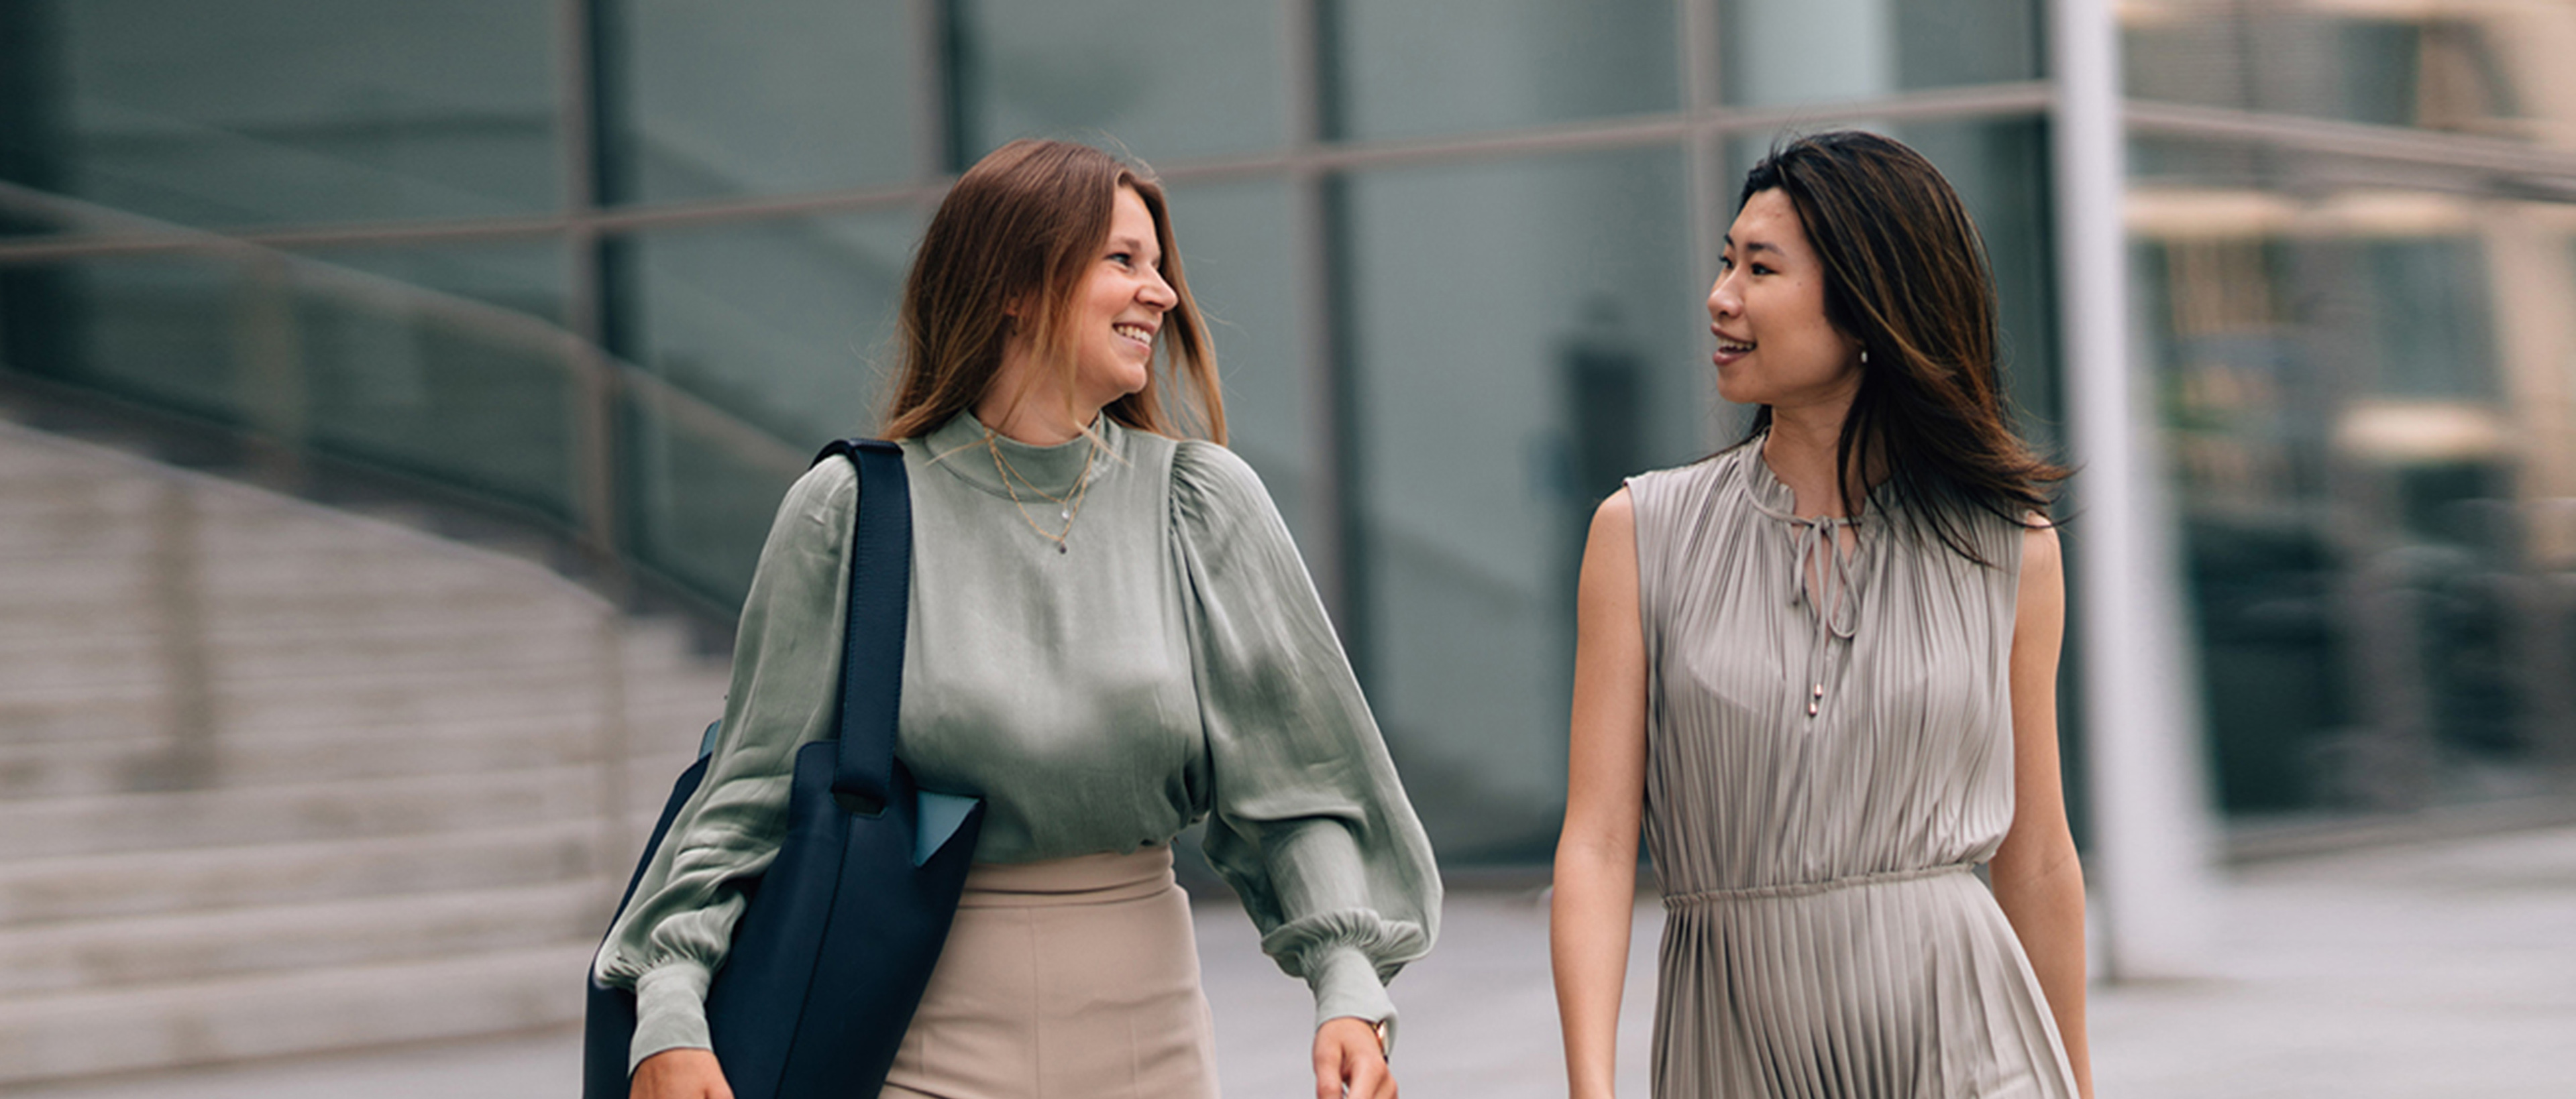 Two business women walking together